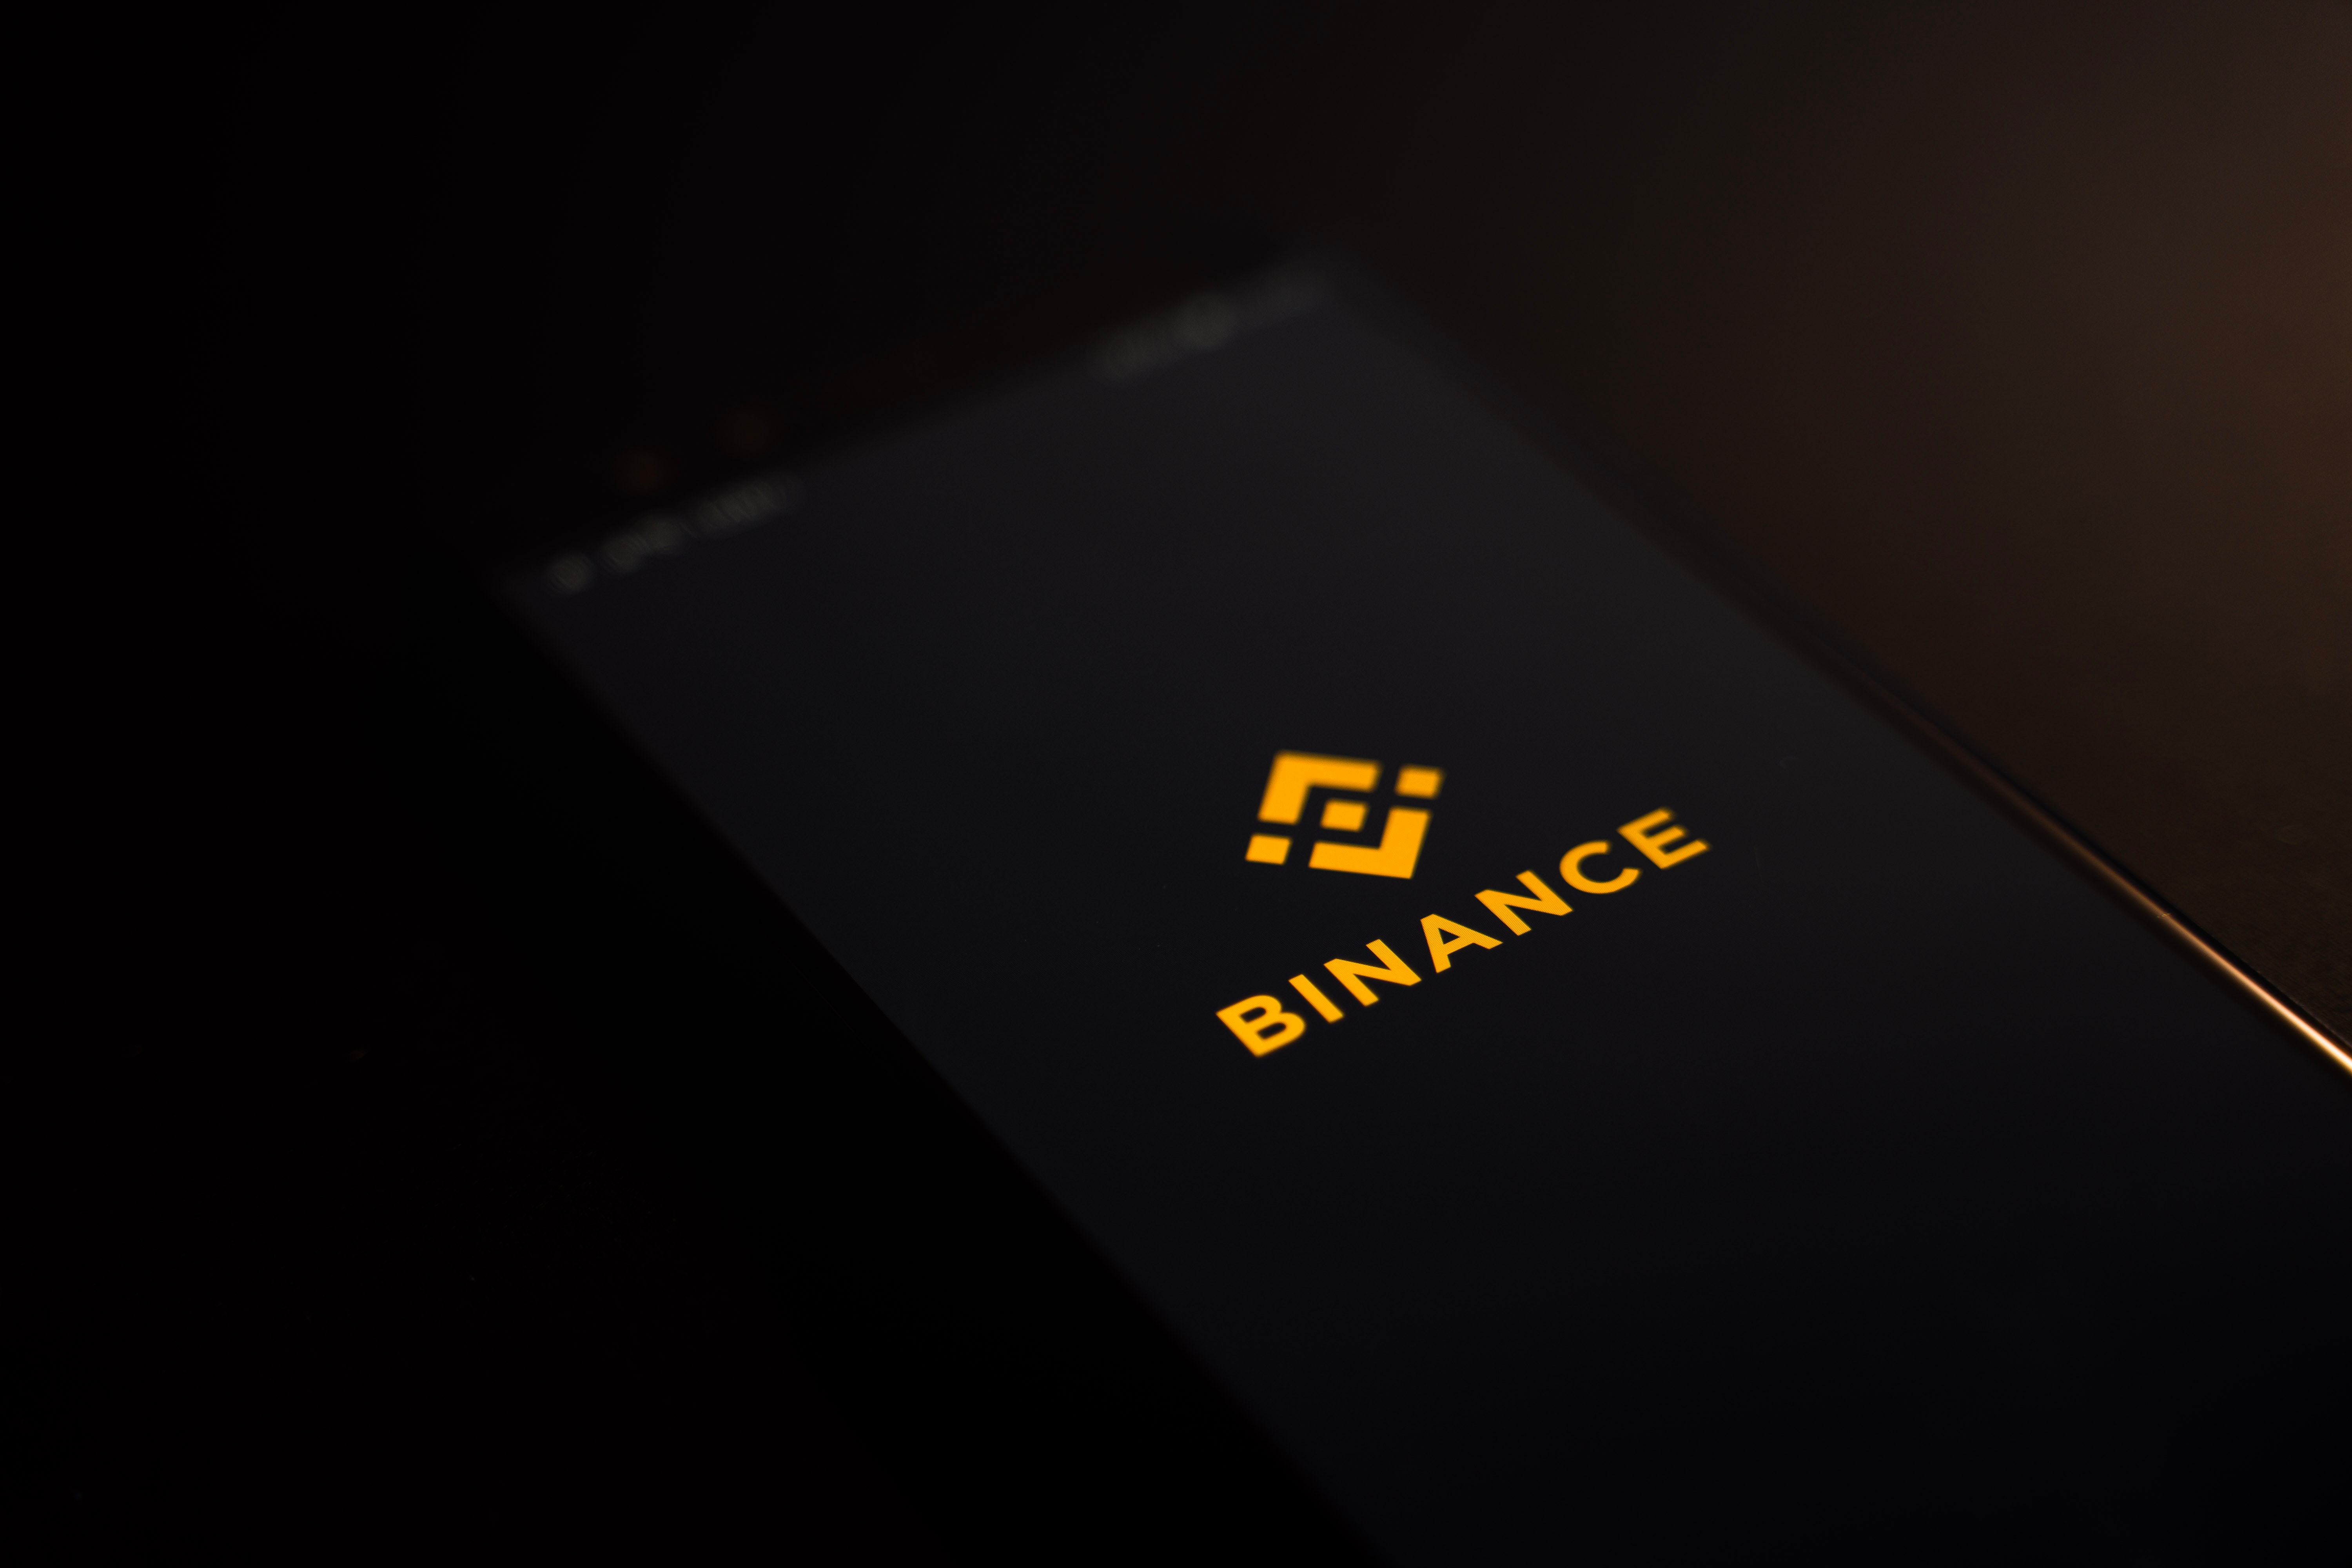 Crypto Bank Silvergate Cuts Ties with Binance, Discontinuing USD Deposits and Withdrawals